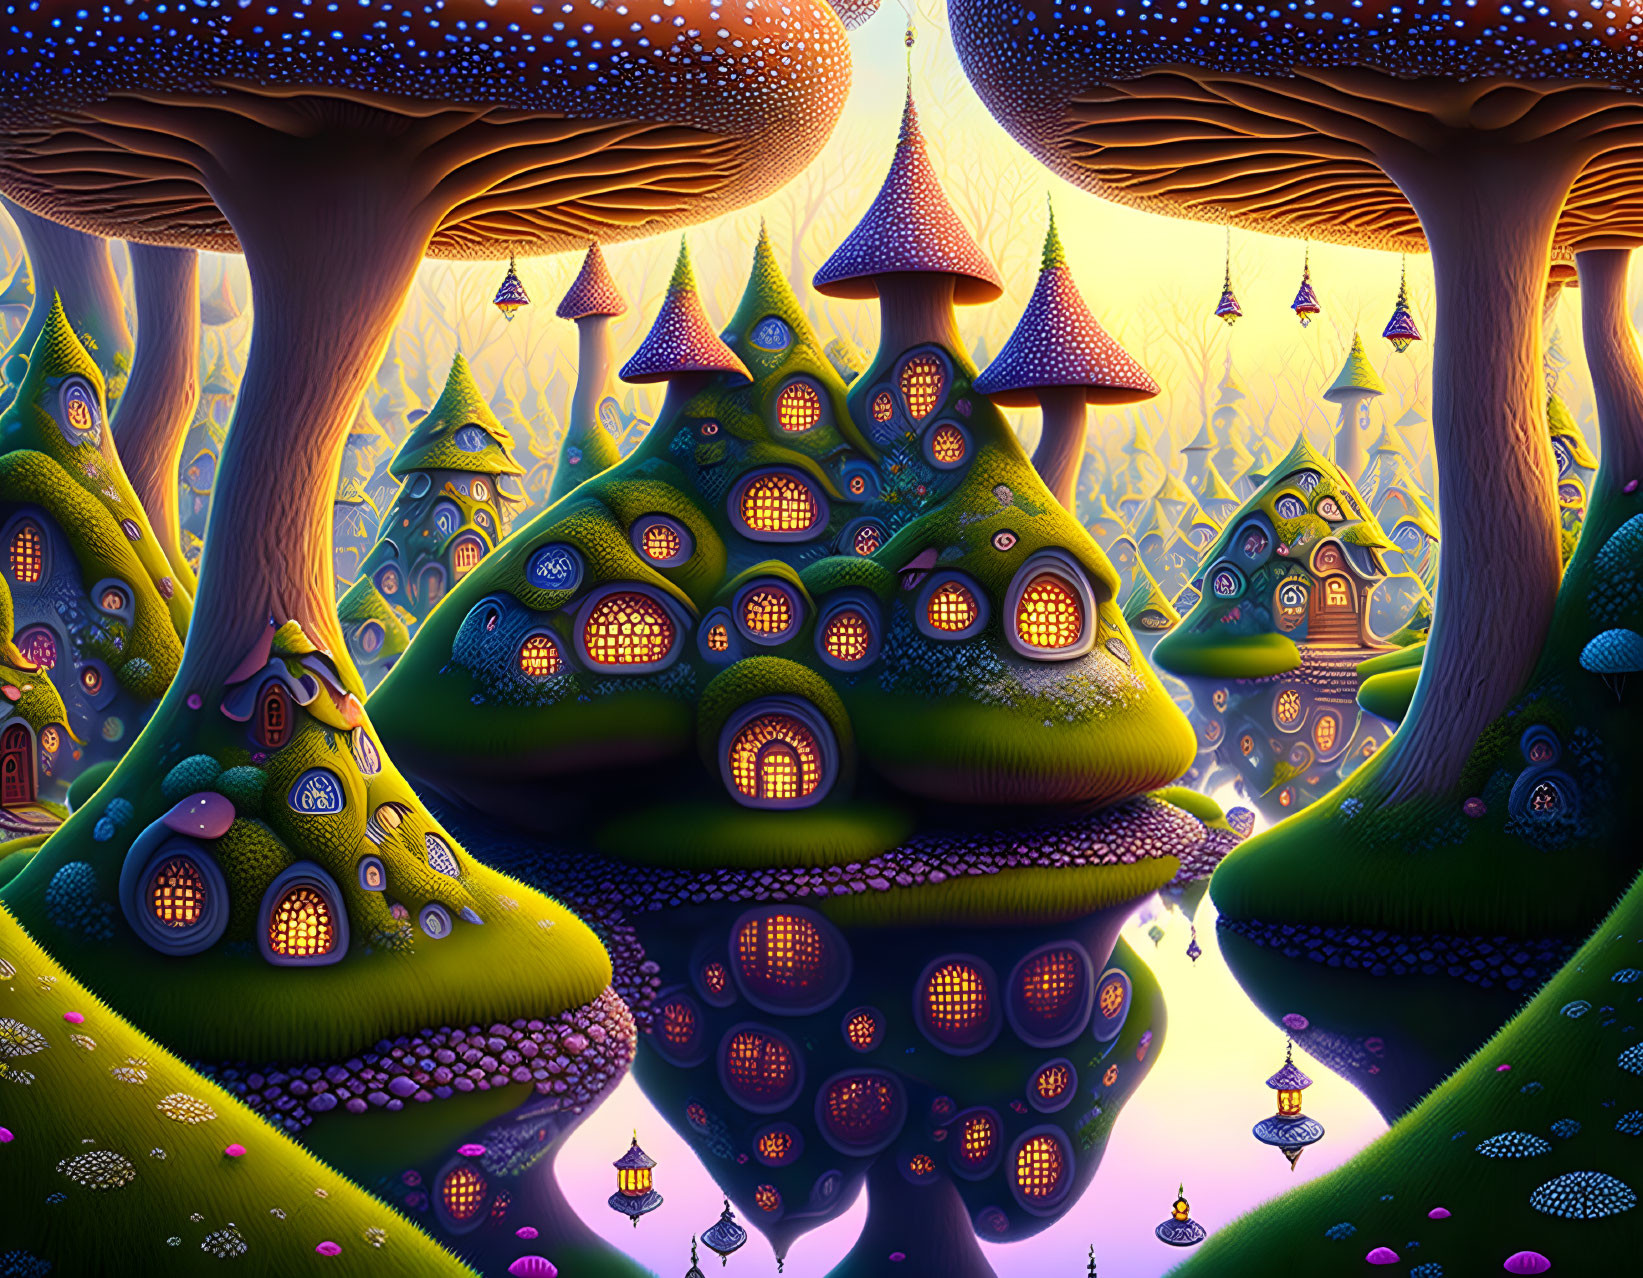 Whimsical landscape with oversized mushrooms and glowing hill houses at twilight